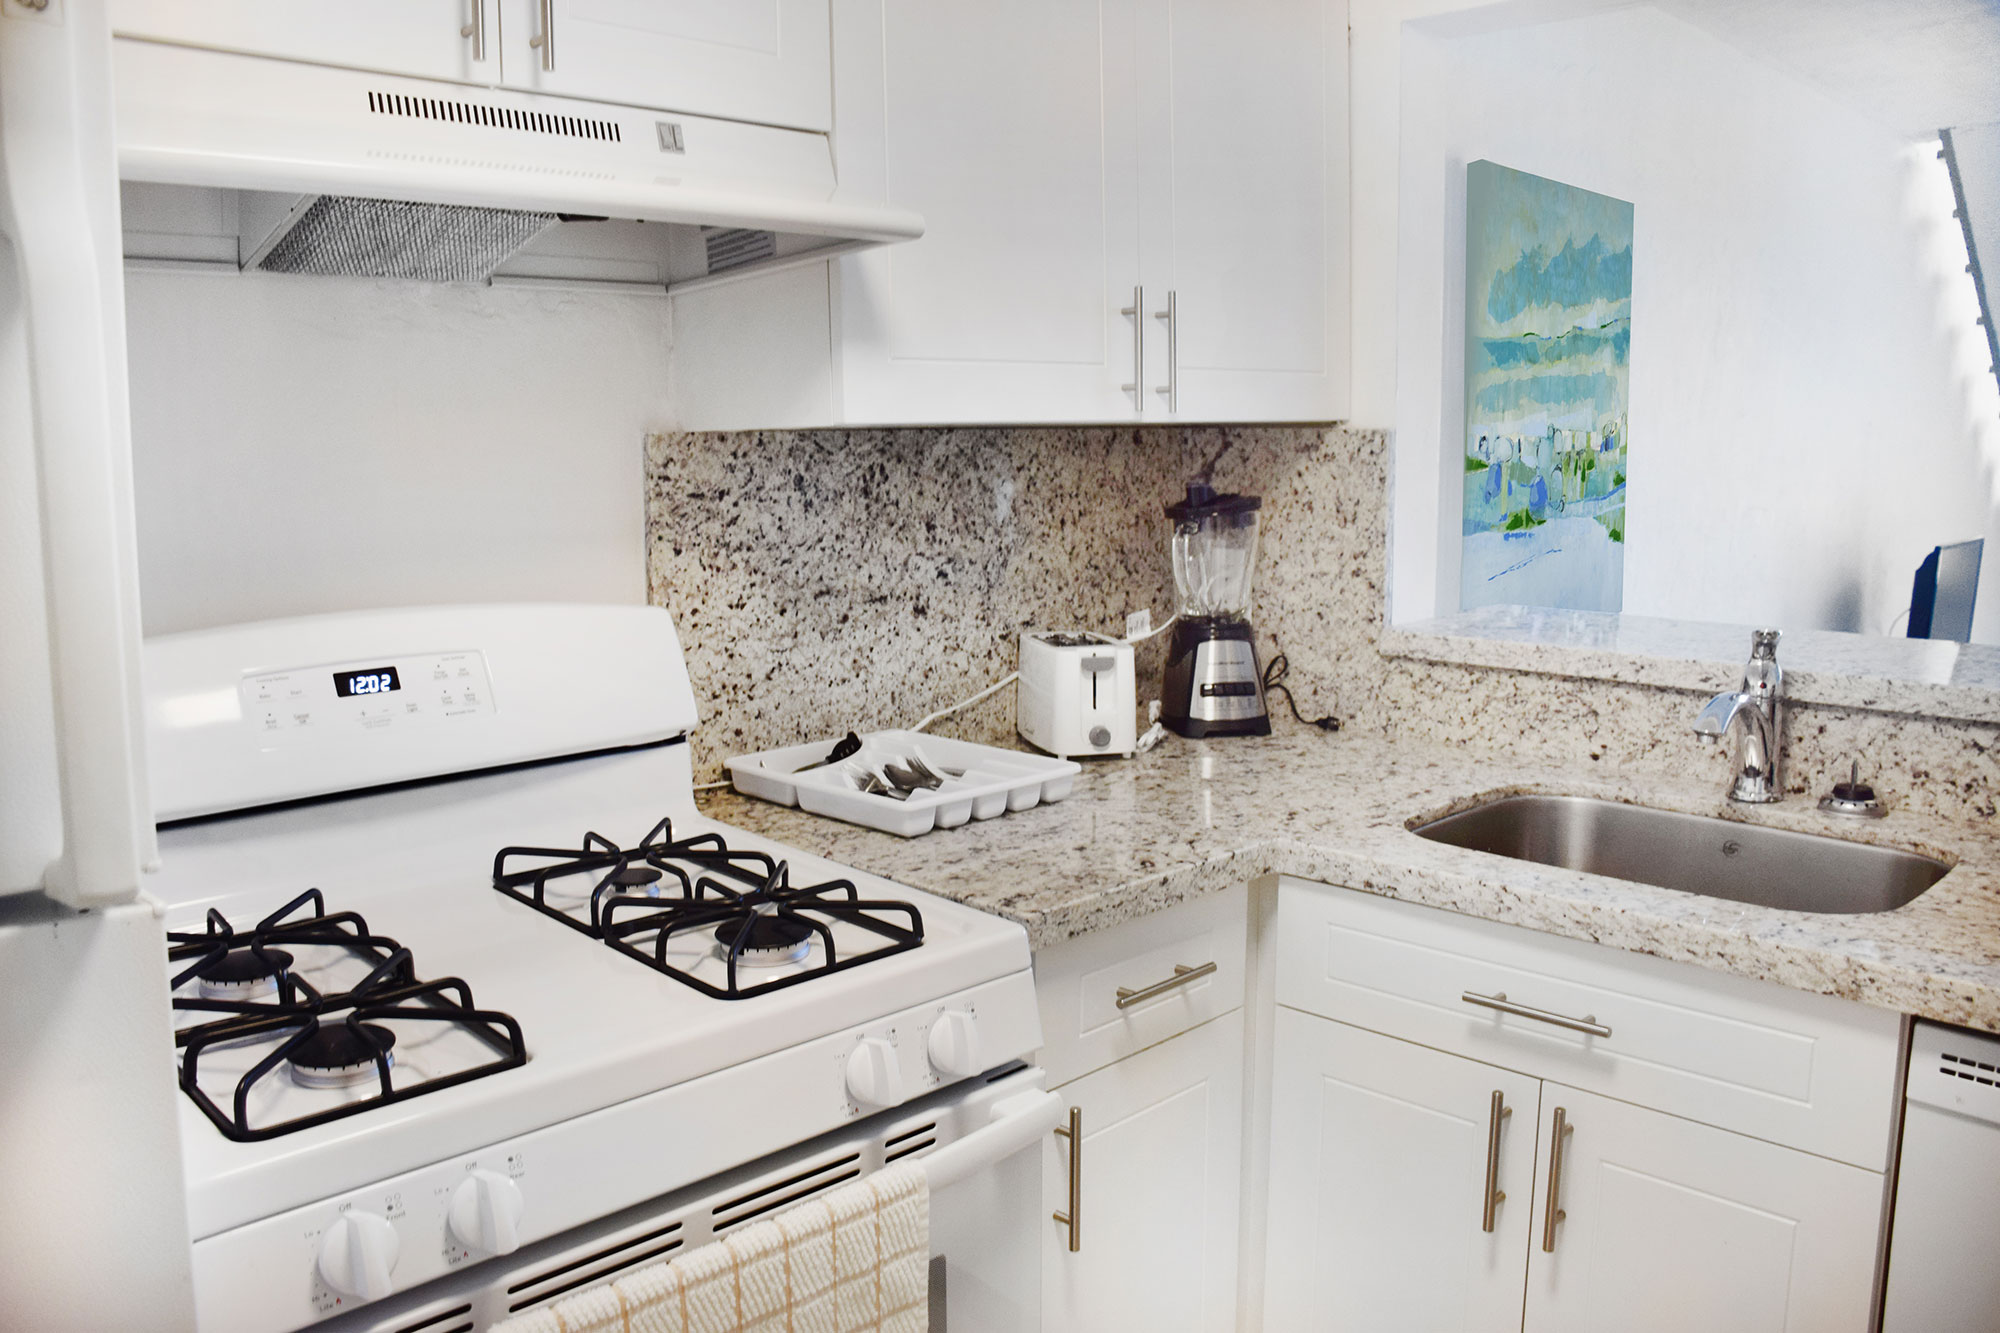 Kitchen of apartment at Coral Reef Key Biscayne